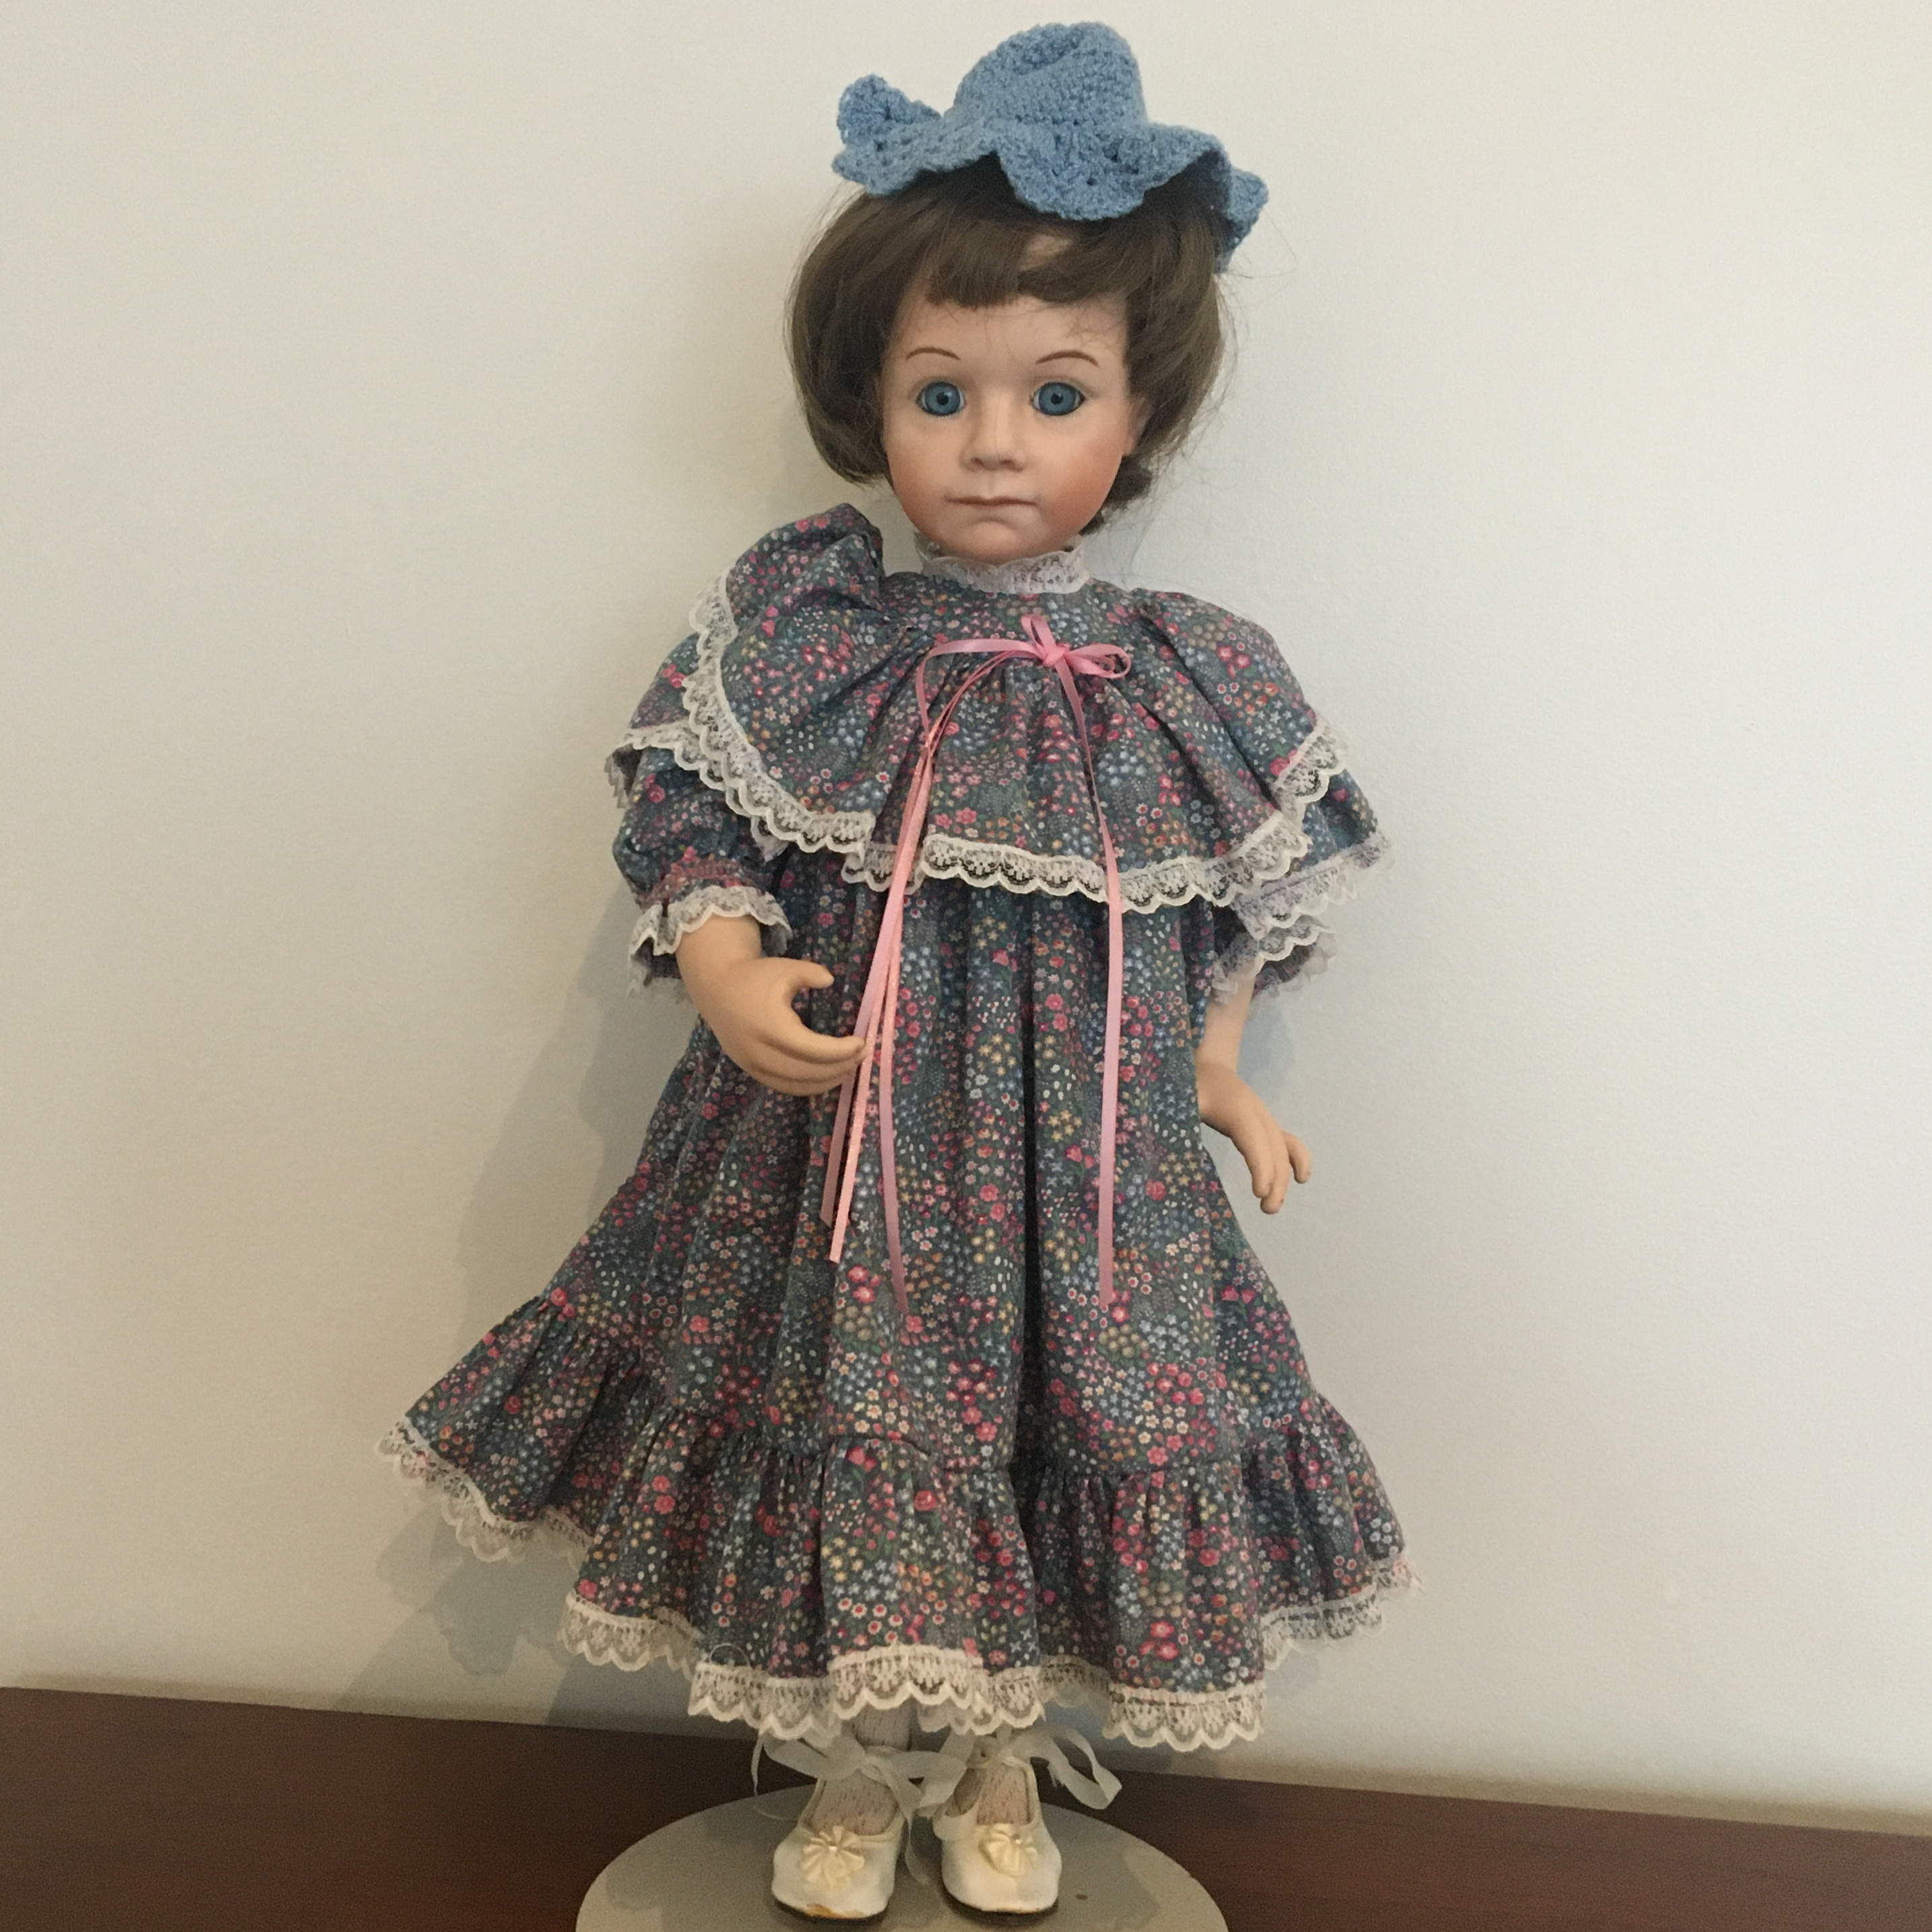 19-inch modern doll in calico dress with short brown hair